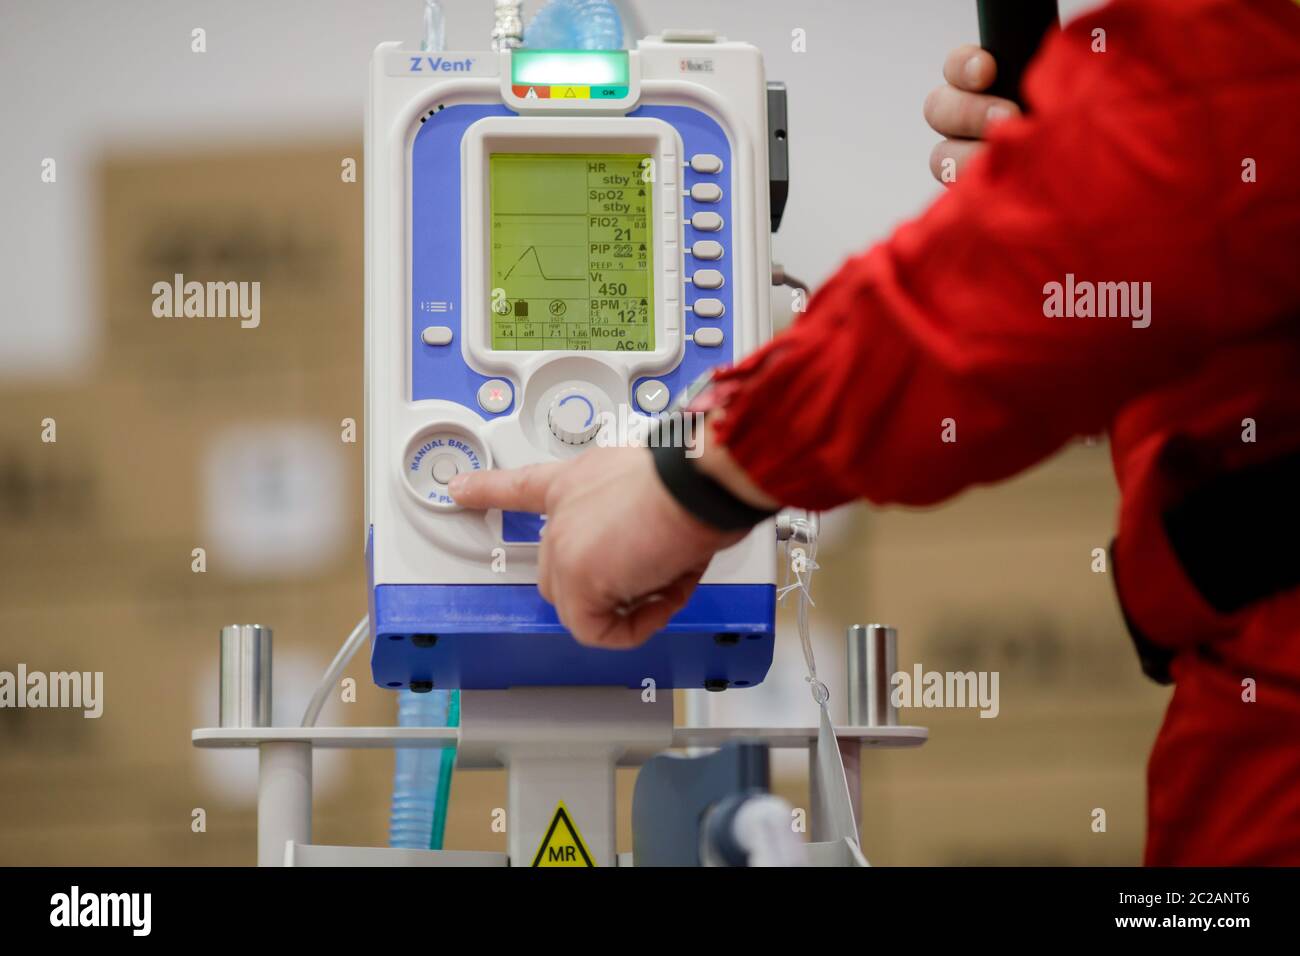 Bucharest, Romania - June 10, 2020: A Zoll portable mechanical medical ventilator on display during a press conference. Stock Photo